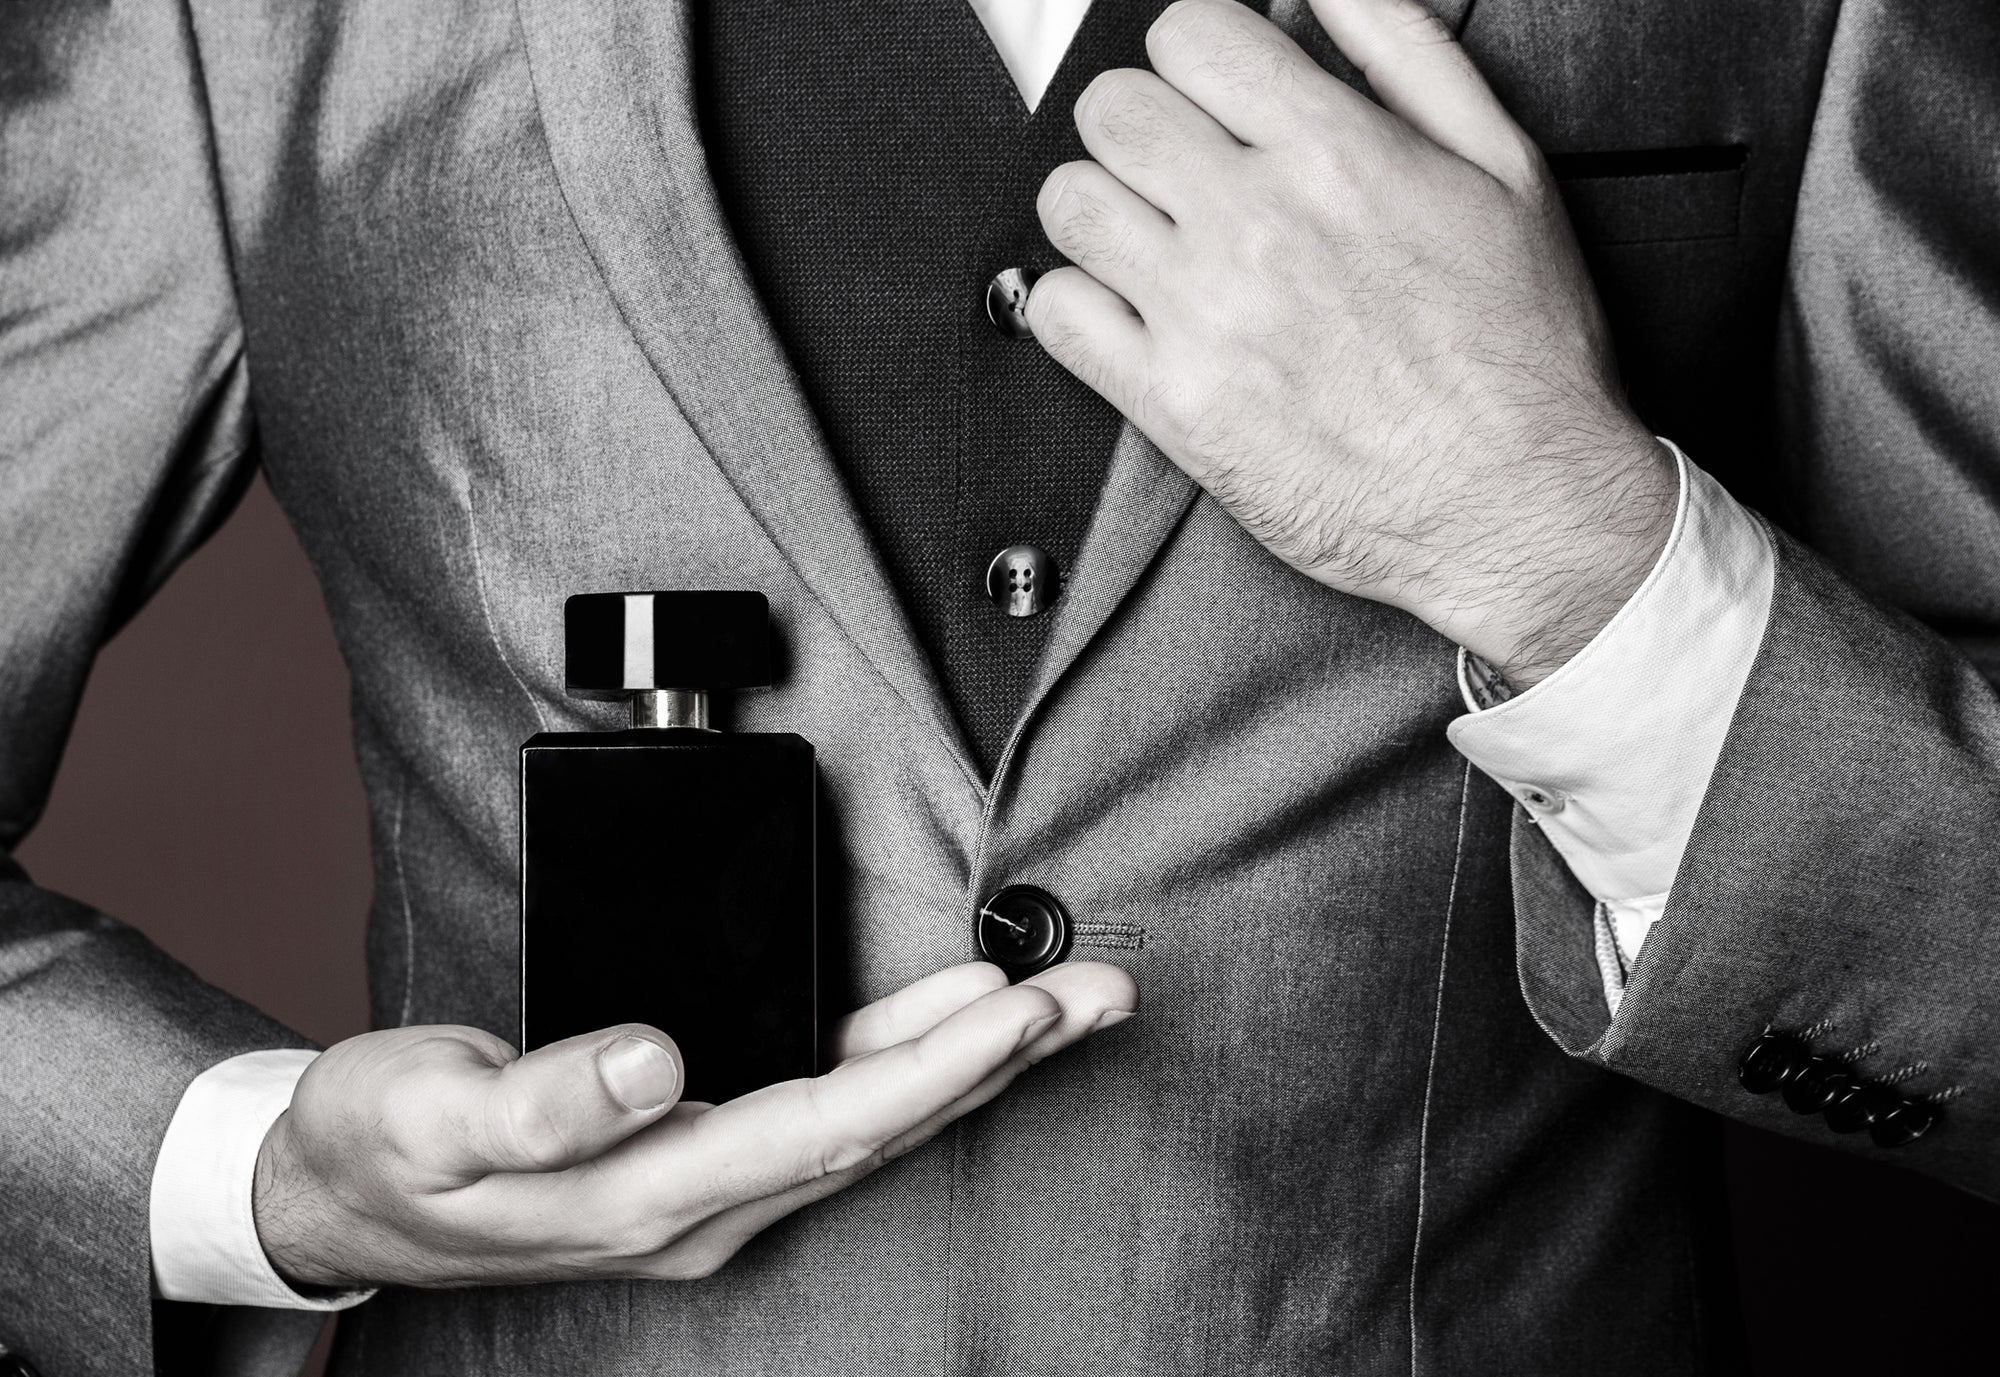 The 5 Masculine Scents That Drive Women Wild